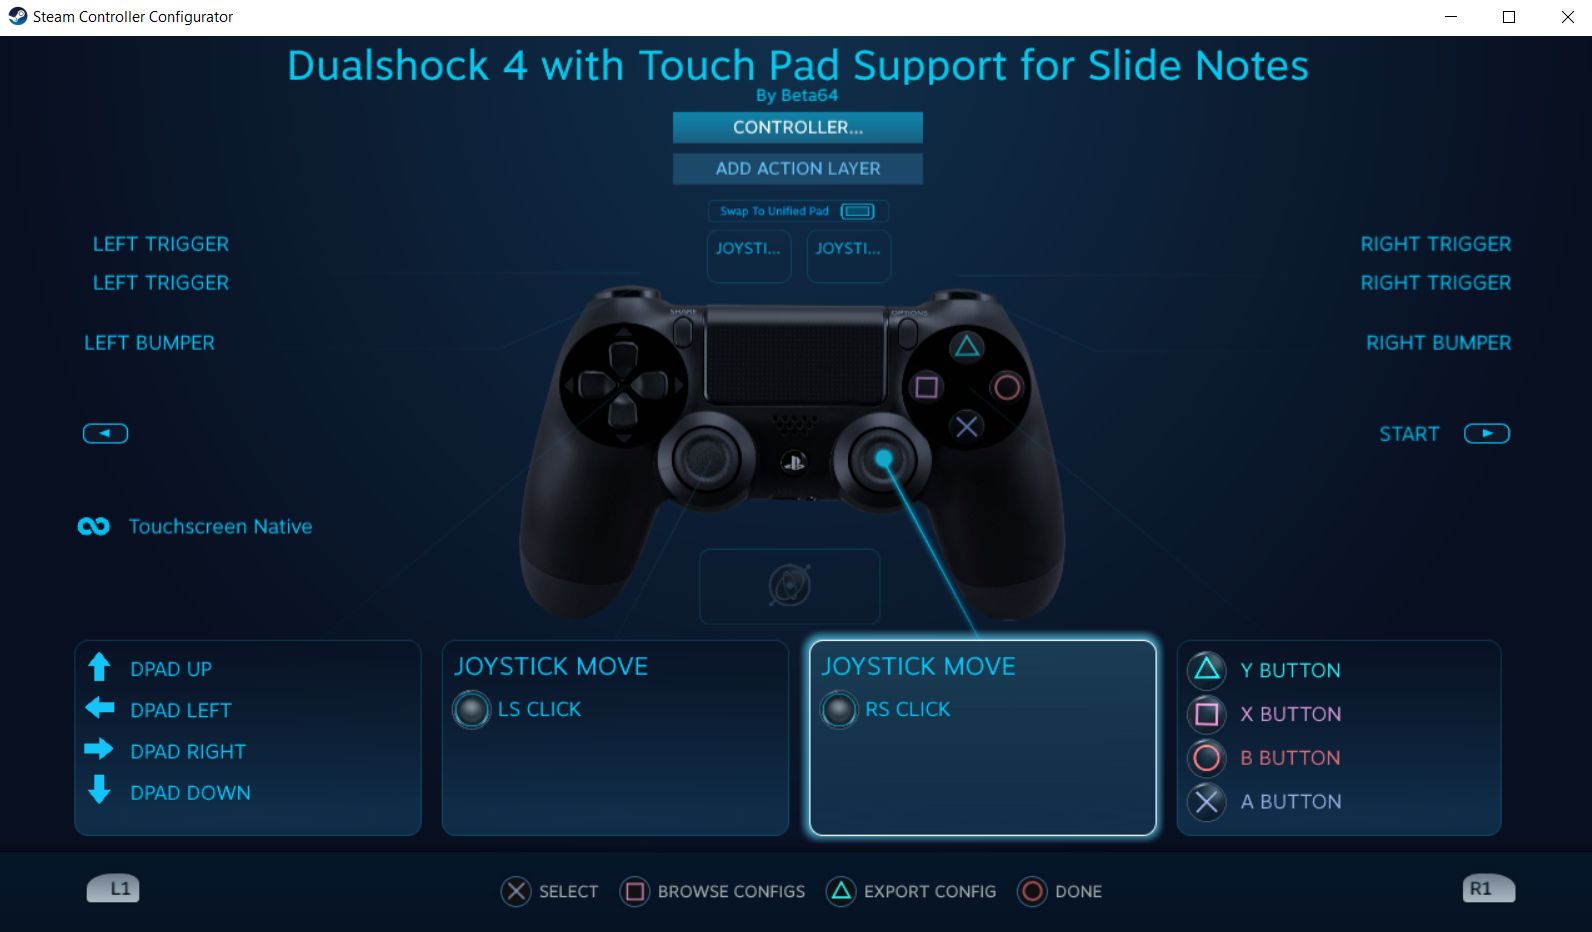 How to use DS4 Touch Pad for Slide Notes